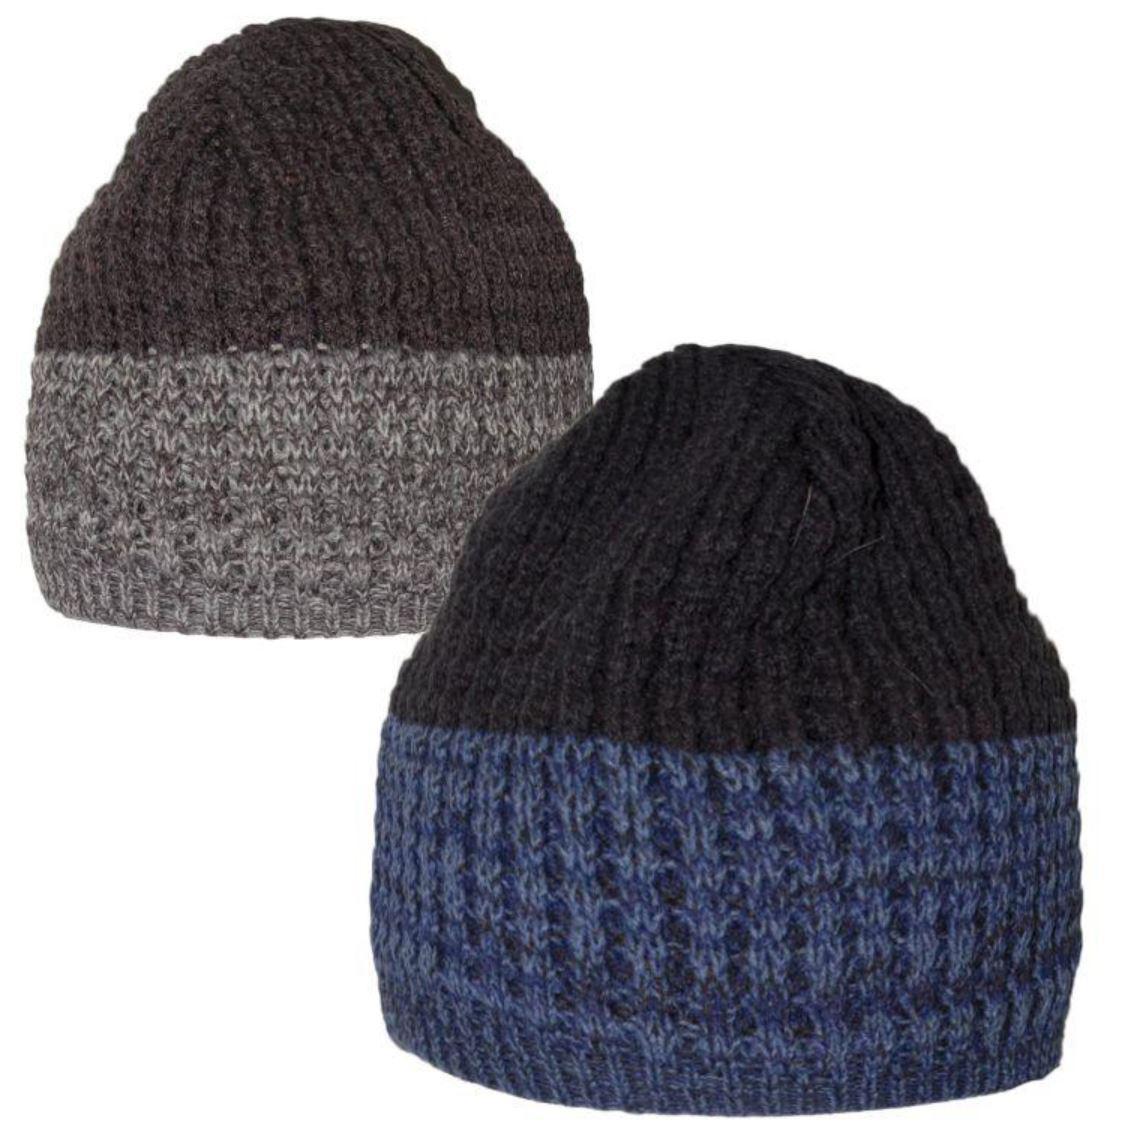 Snowboard Knit Skully with Fleece Lining